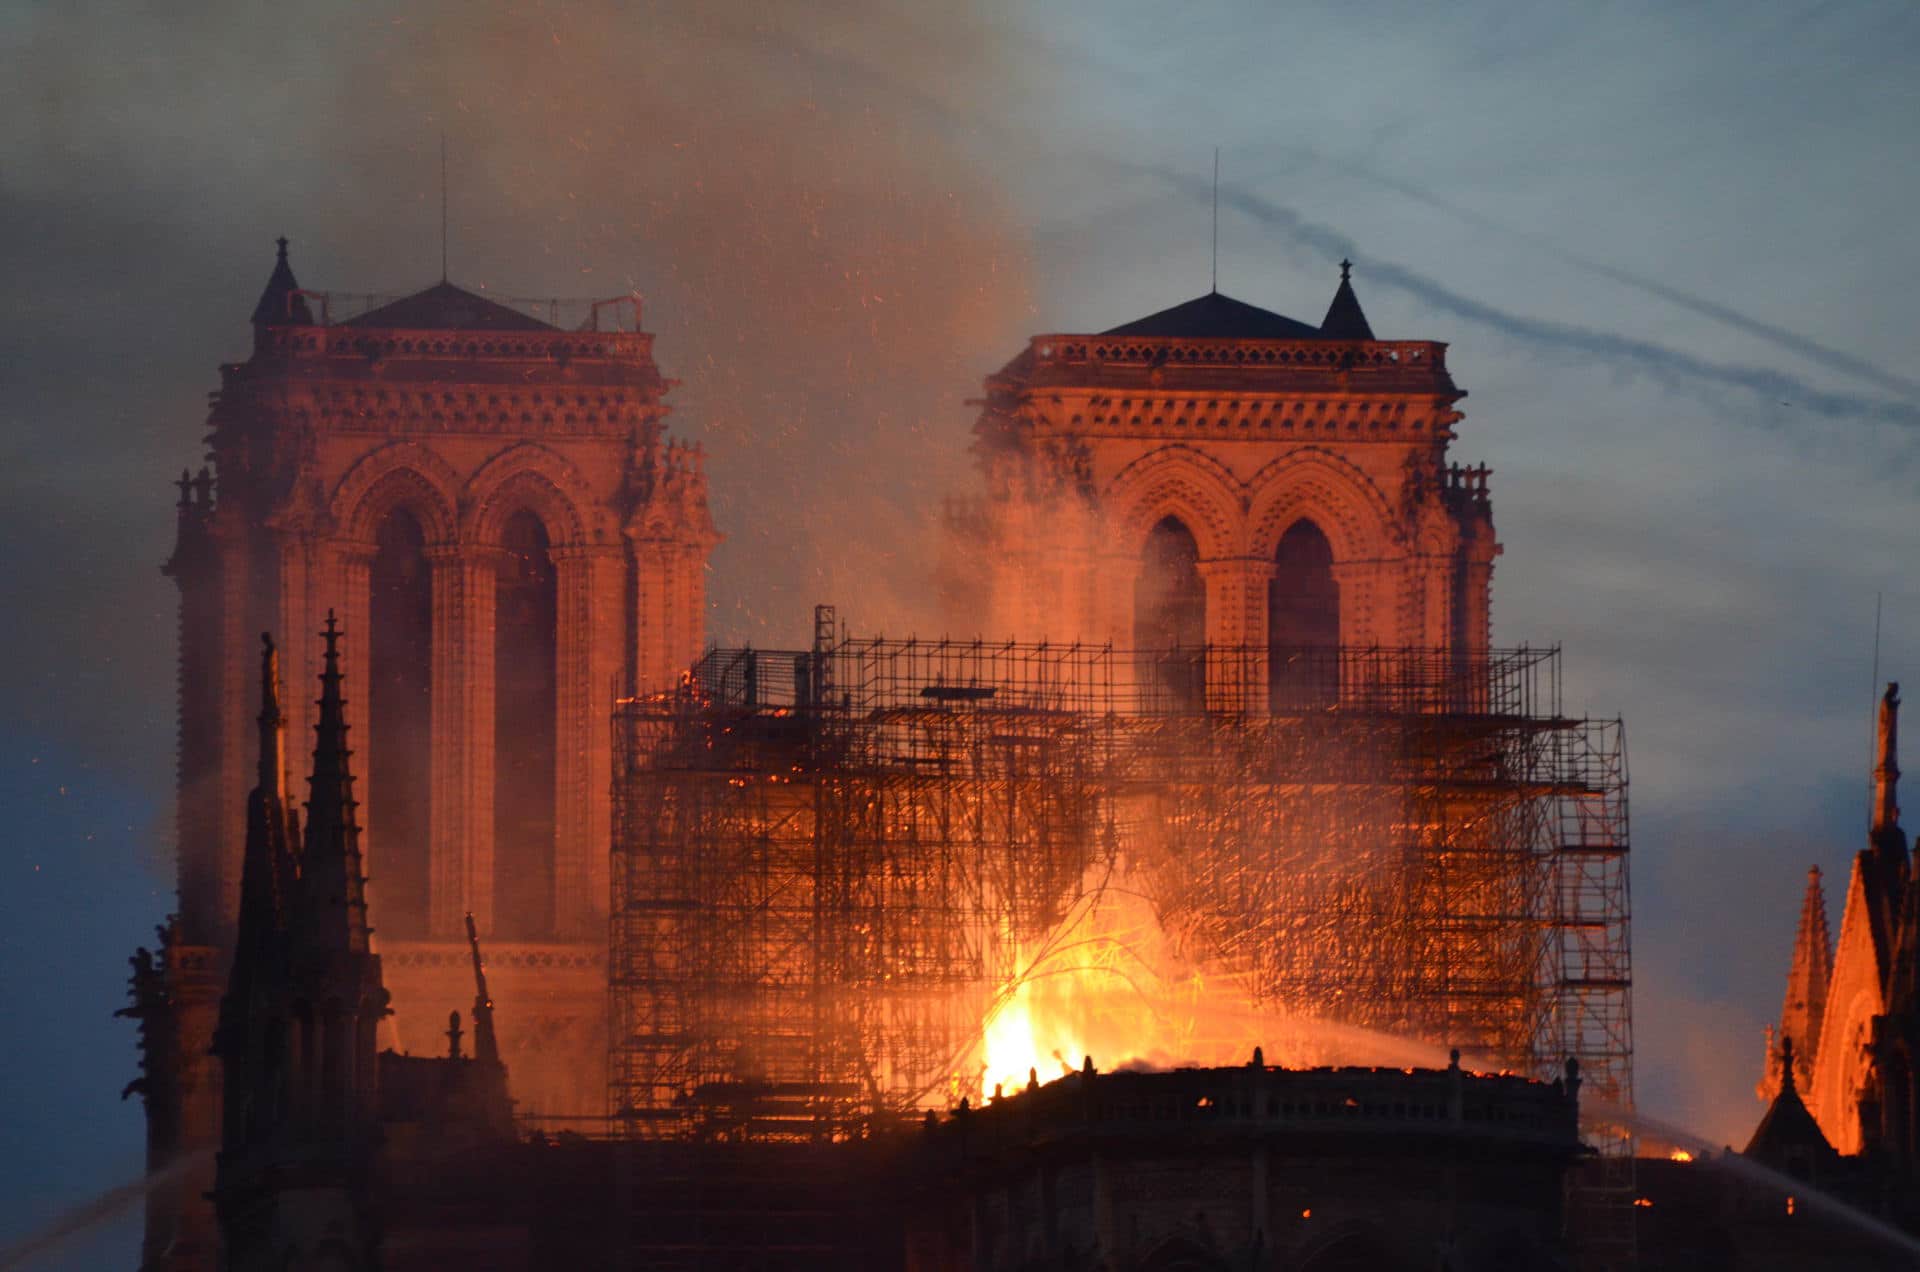 On April 15, 2019, the world watched in horror as Notre-Dame Cathedral burned